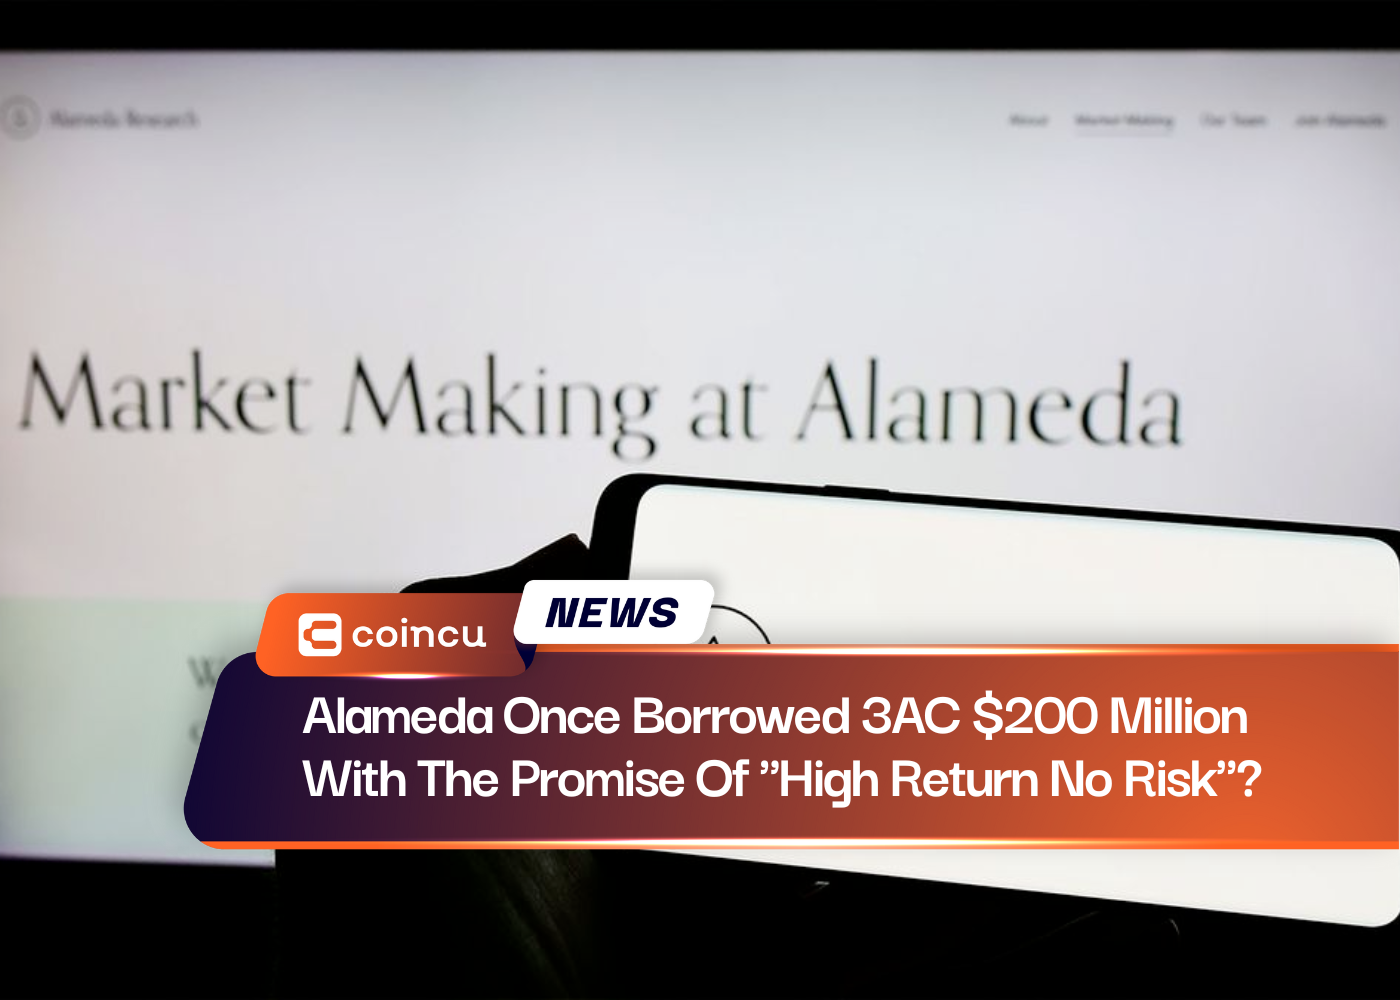 Alameda Once Borrowed 3AC $200 Million With The Promise Of "High Return No Risk"?